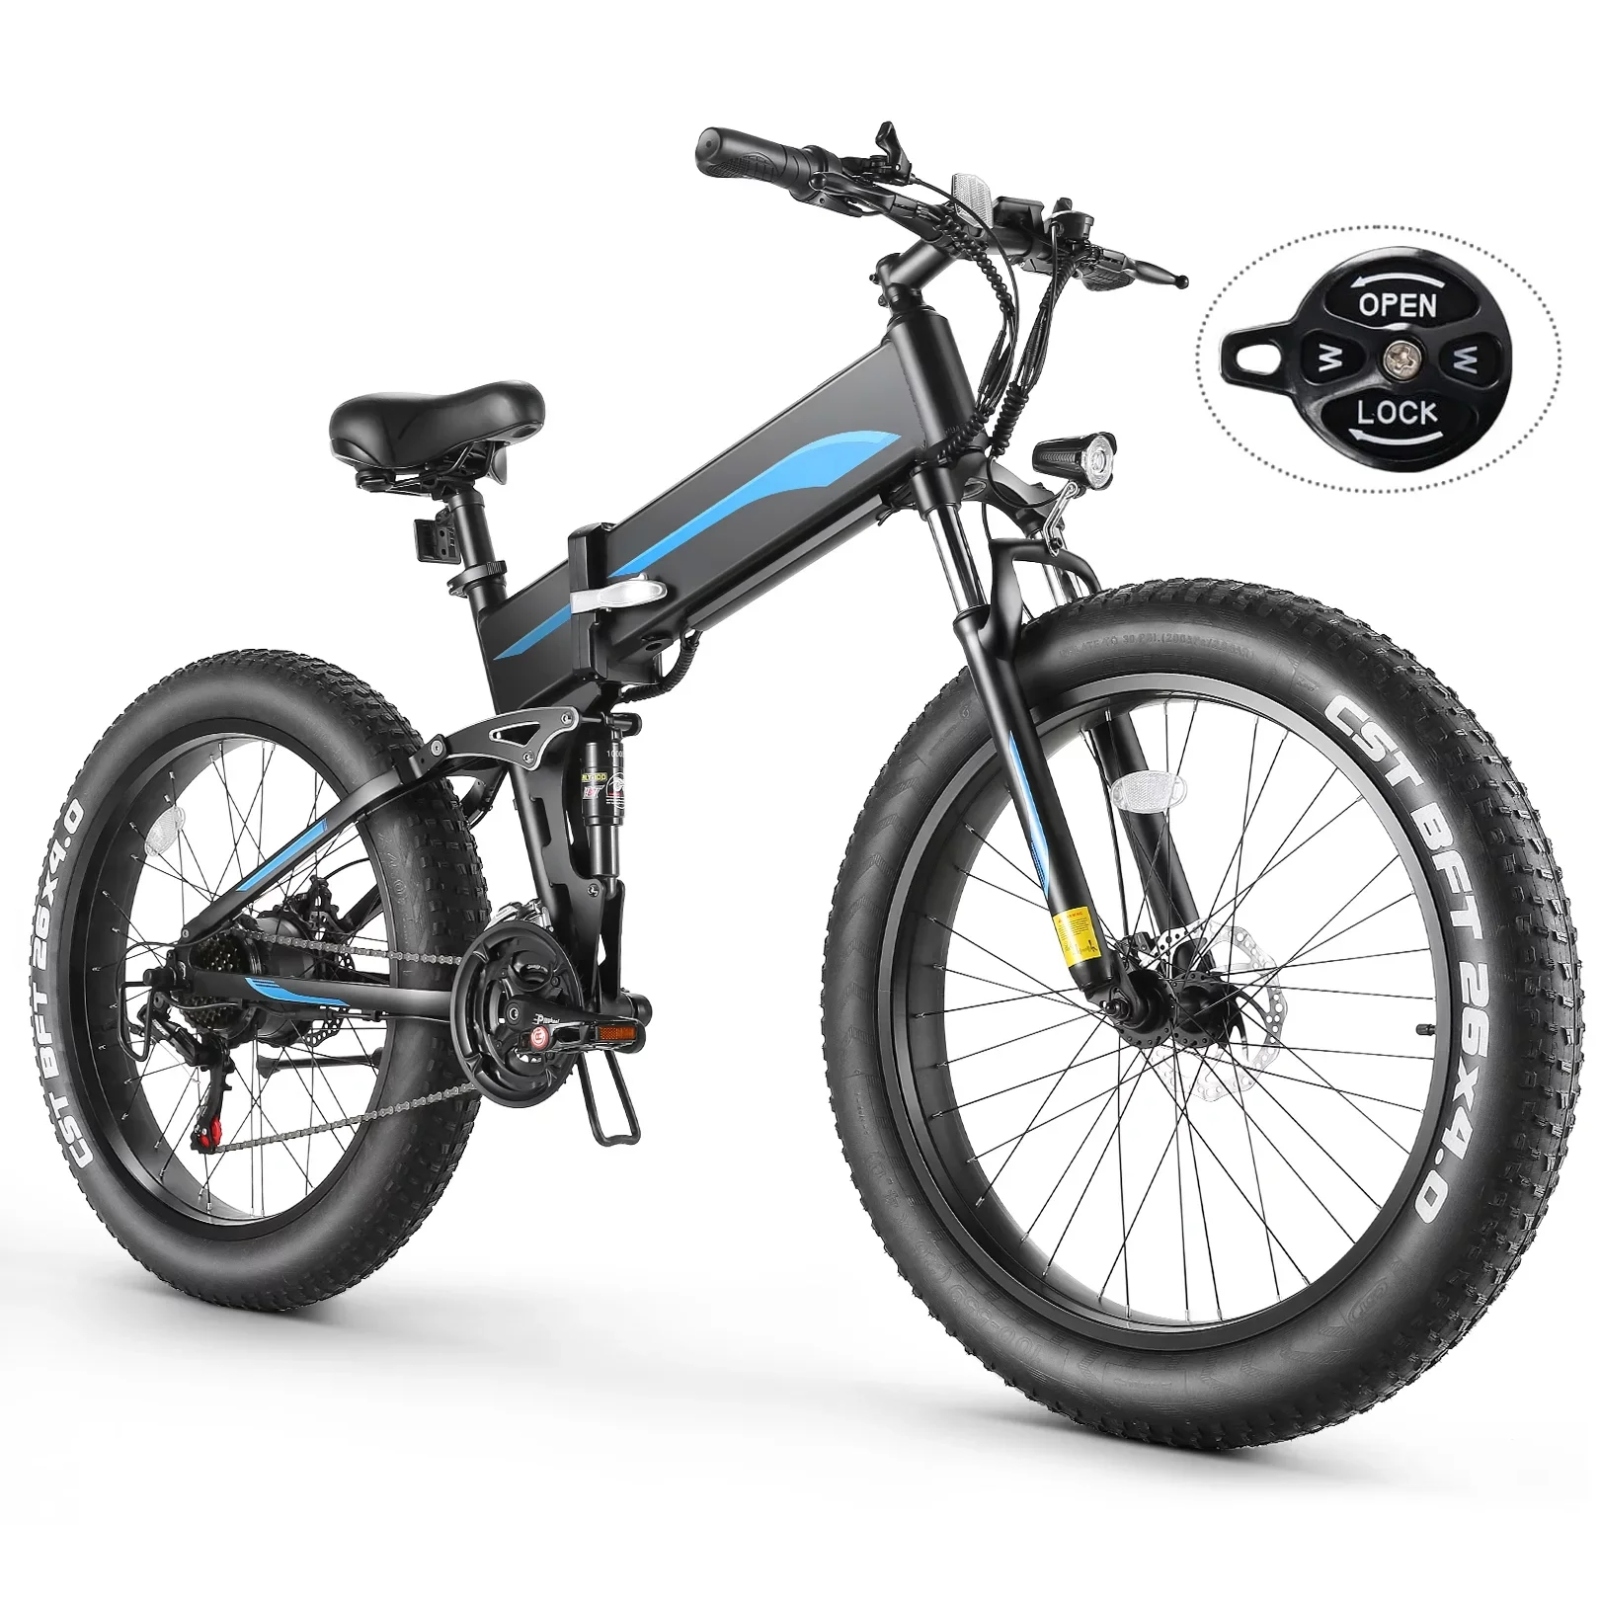 Electric Bike, 26" x 4" Fat Tire Electric Bike for Adults 500W 19.8MPH Electric Mountain Bicycle Snow Beach Ebike, 48V 10.4Ah Battery, Lockable Suspension Fork, LCD Display, Fast Charge, Red - image 13 of 16